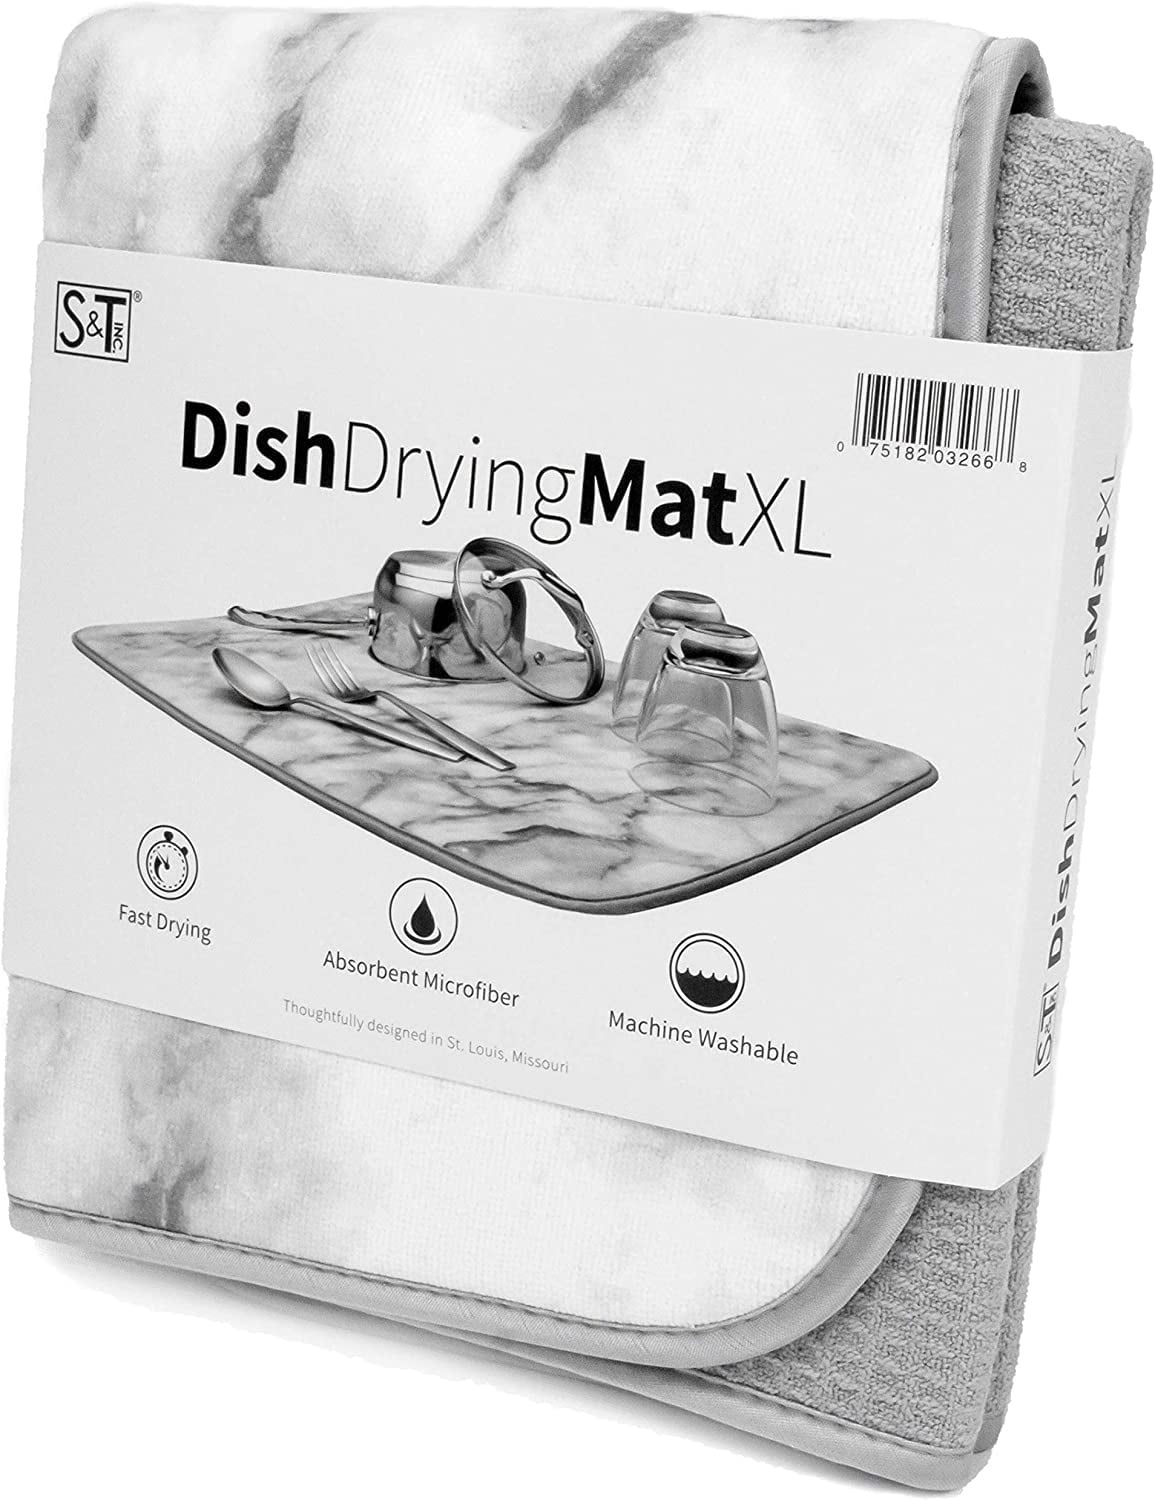 S&T 405100 Microfiber Dish Drying Mat, X-Large, 18 by 24-Inch, Cream